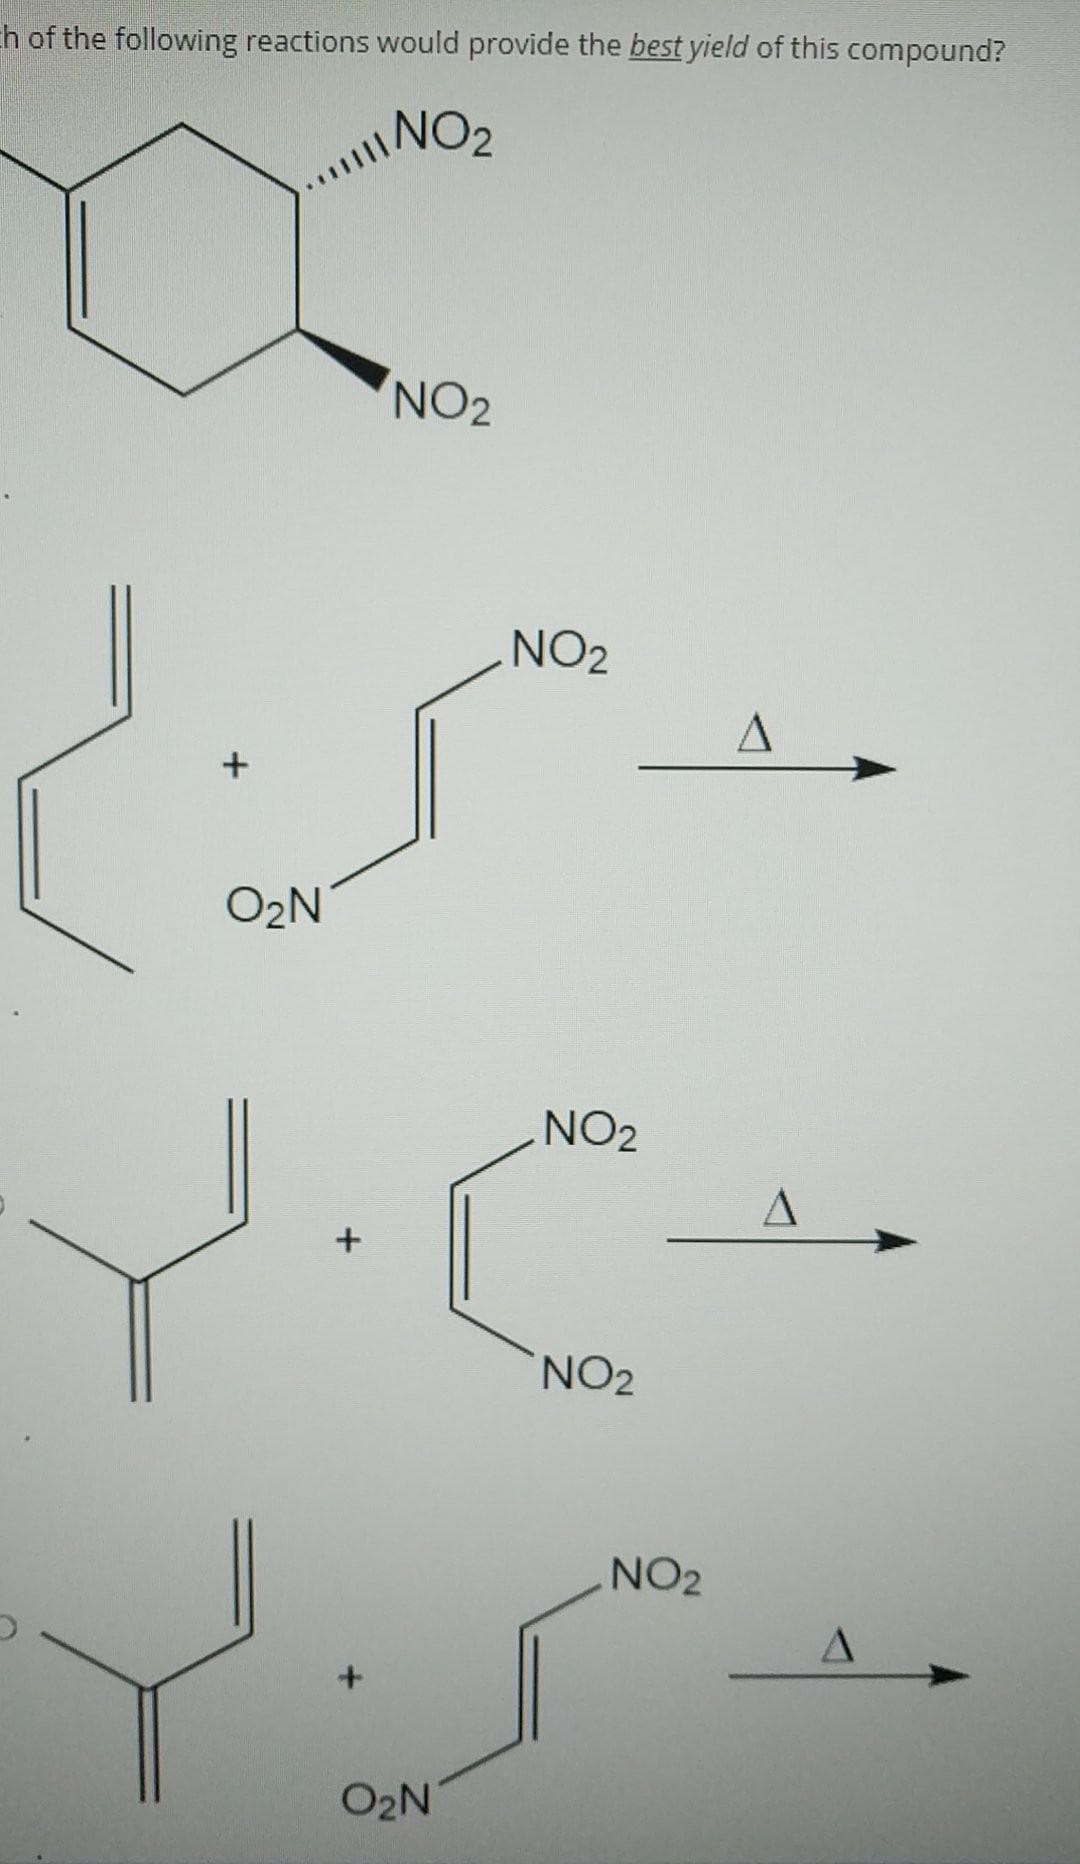 h of the following reactions would provide the best yield of this compound?
NO2
NO2
NO2
O2N
NO2
NO2
NO2
O2N
